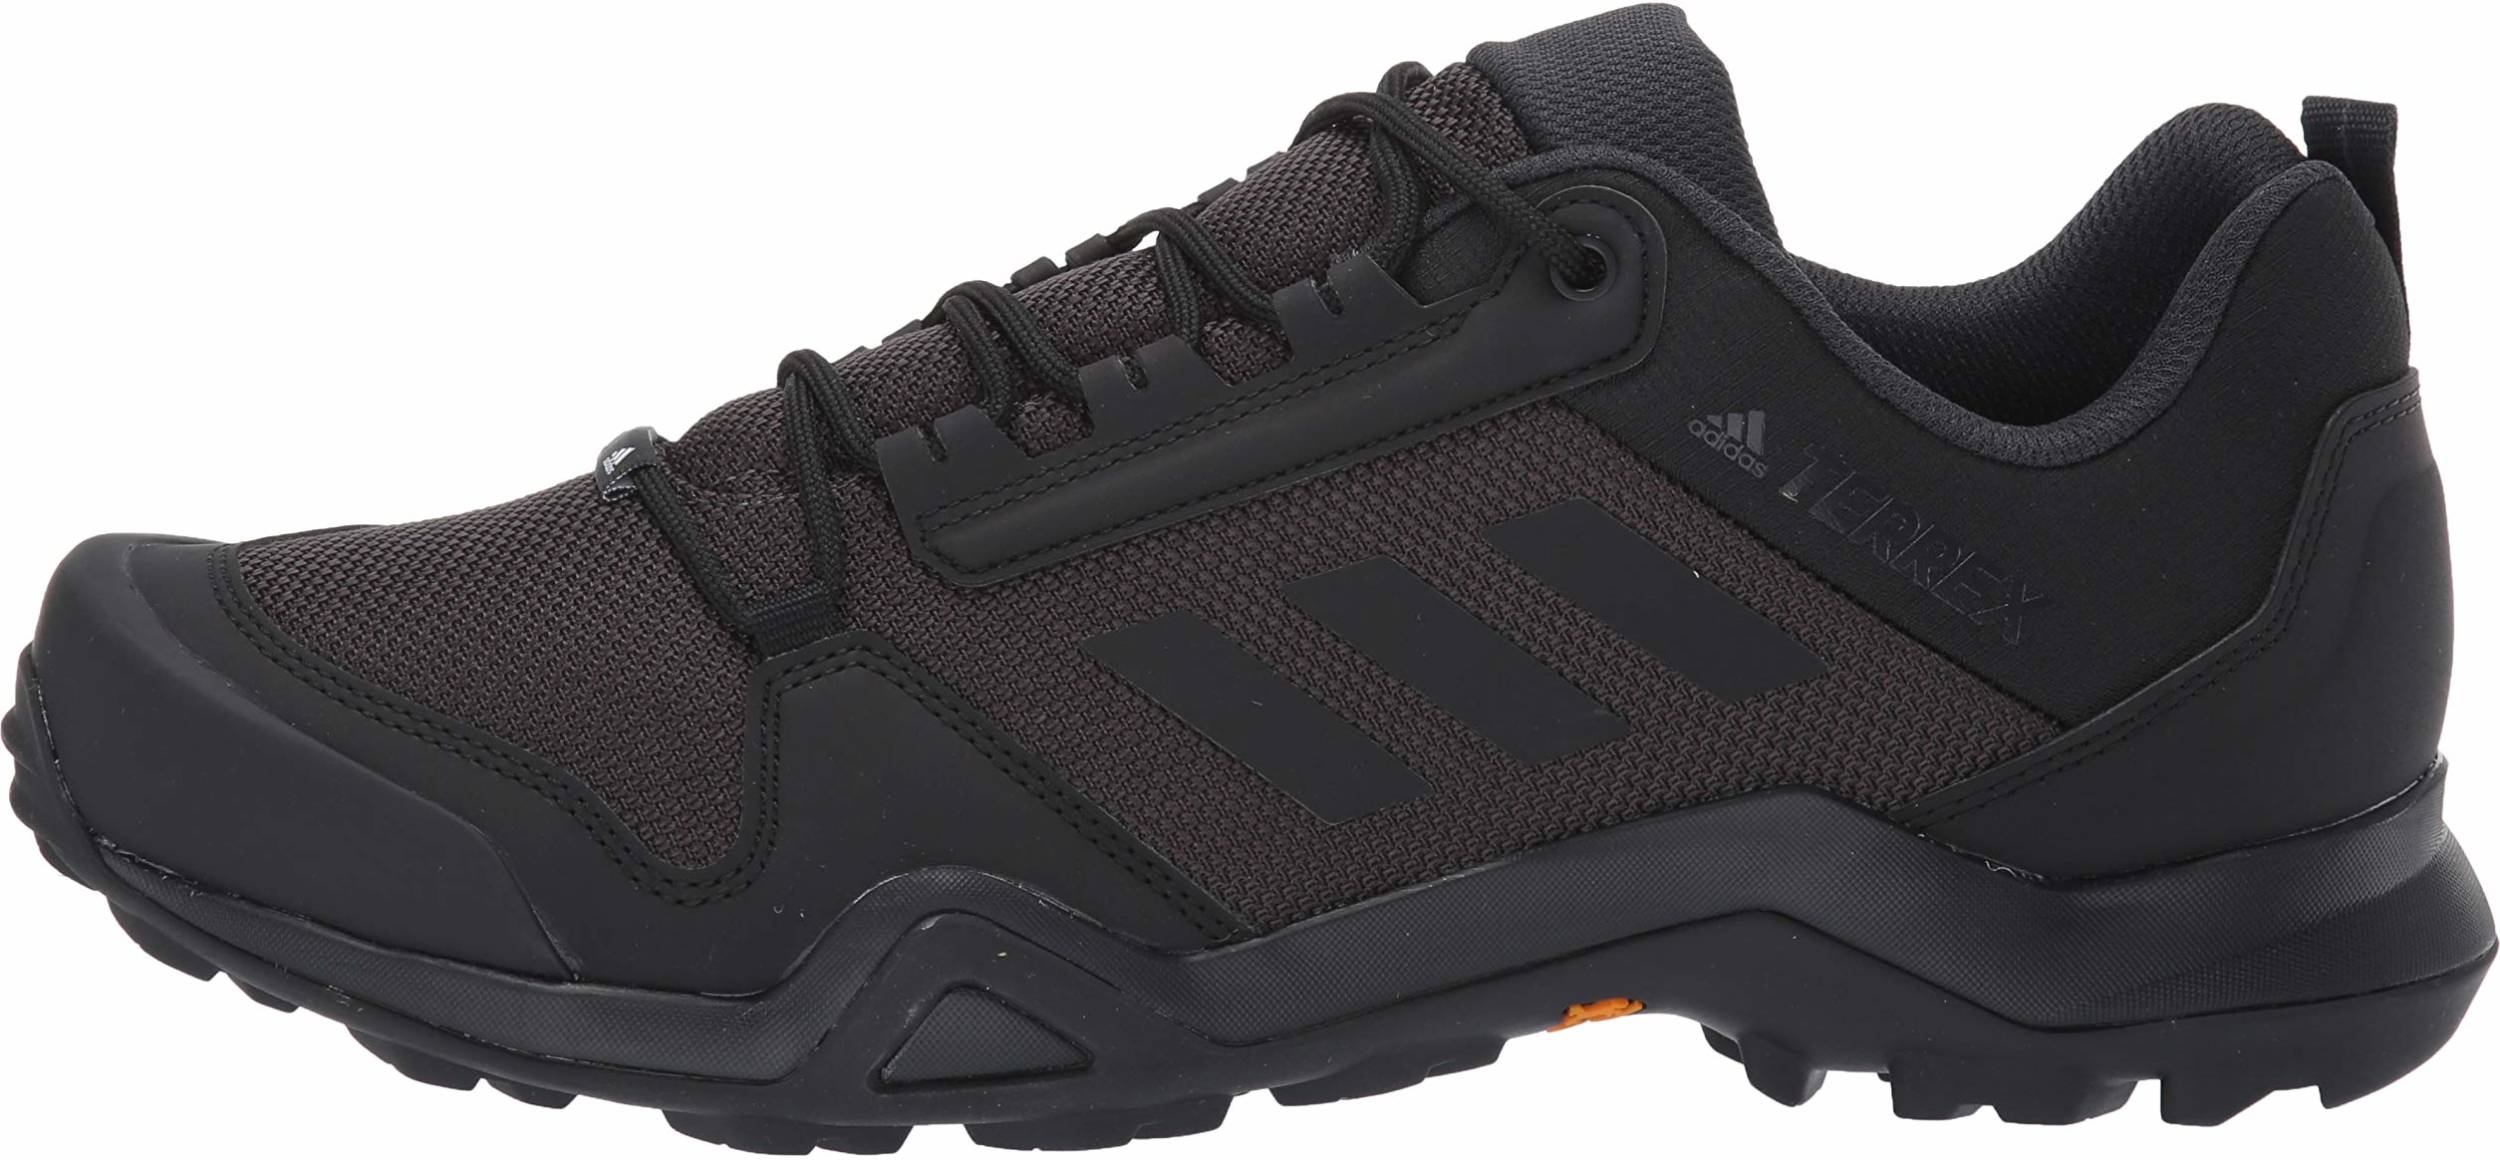 Only $62 + Review of Adidas Terrex AX3 